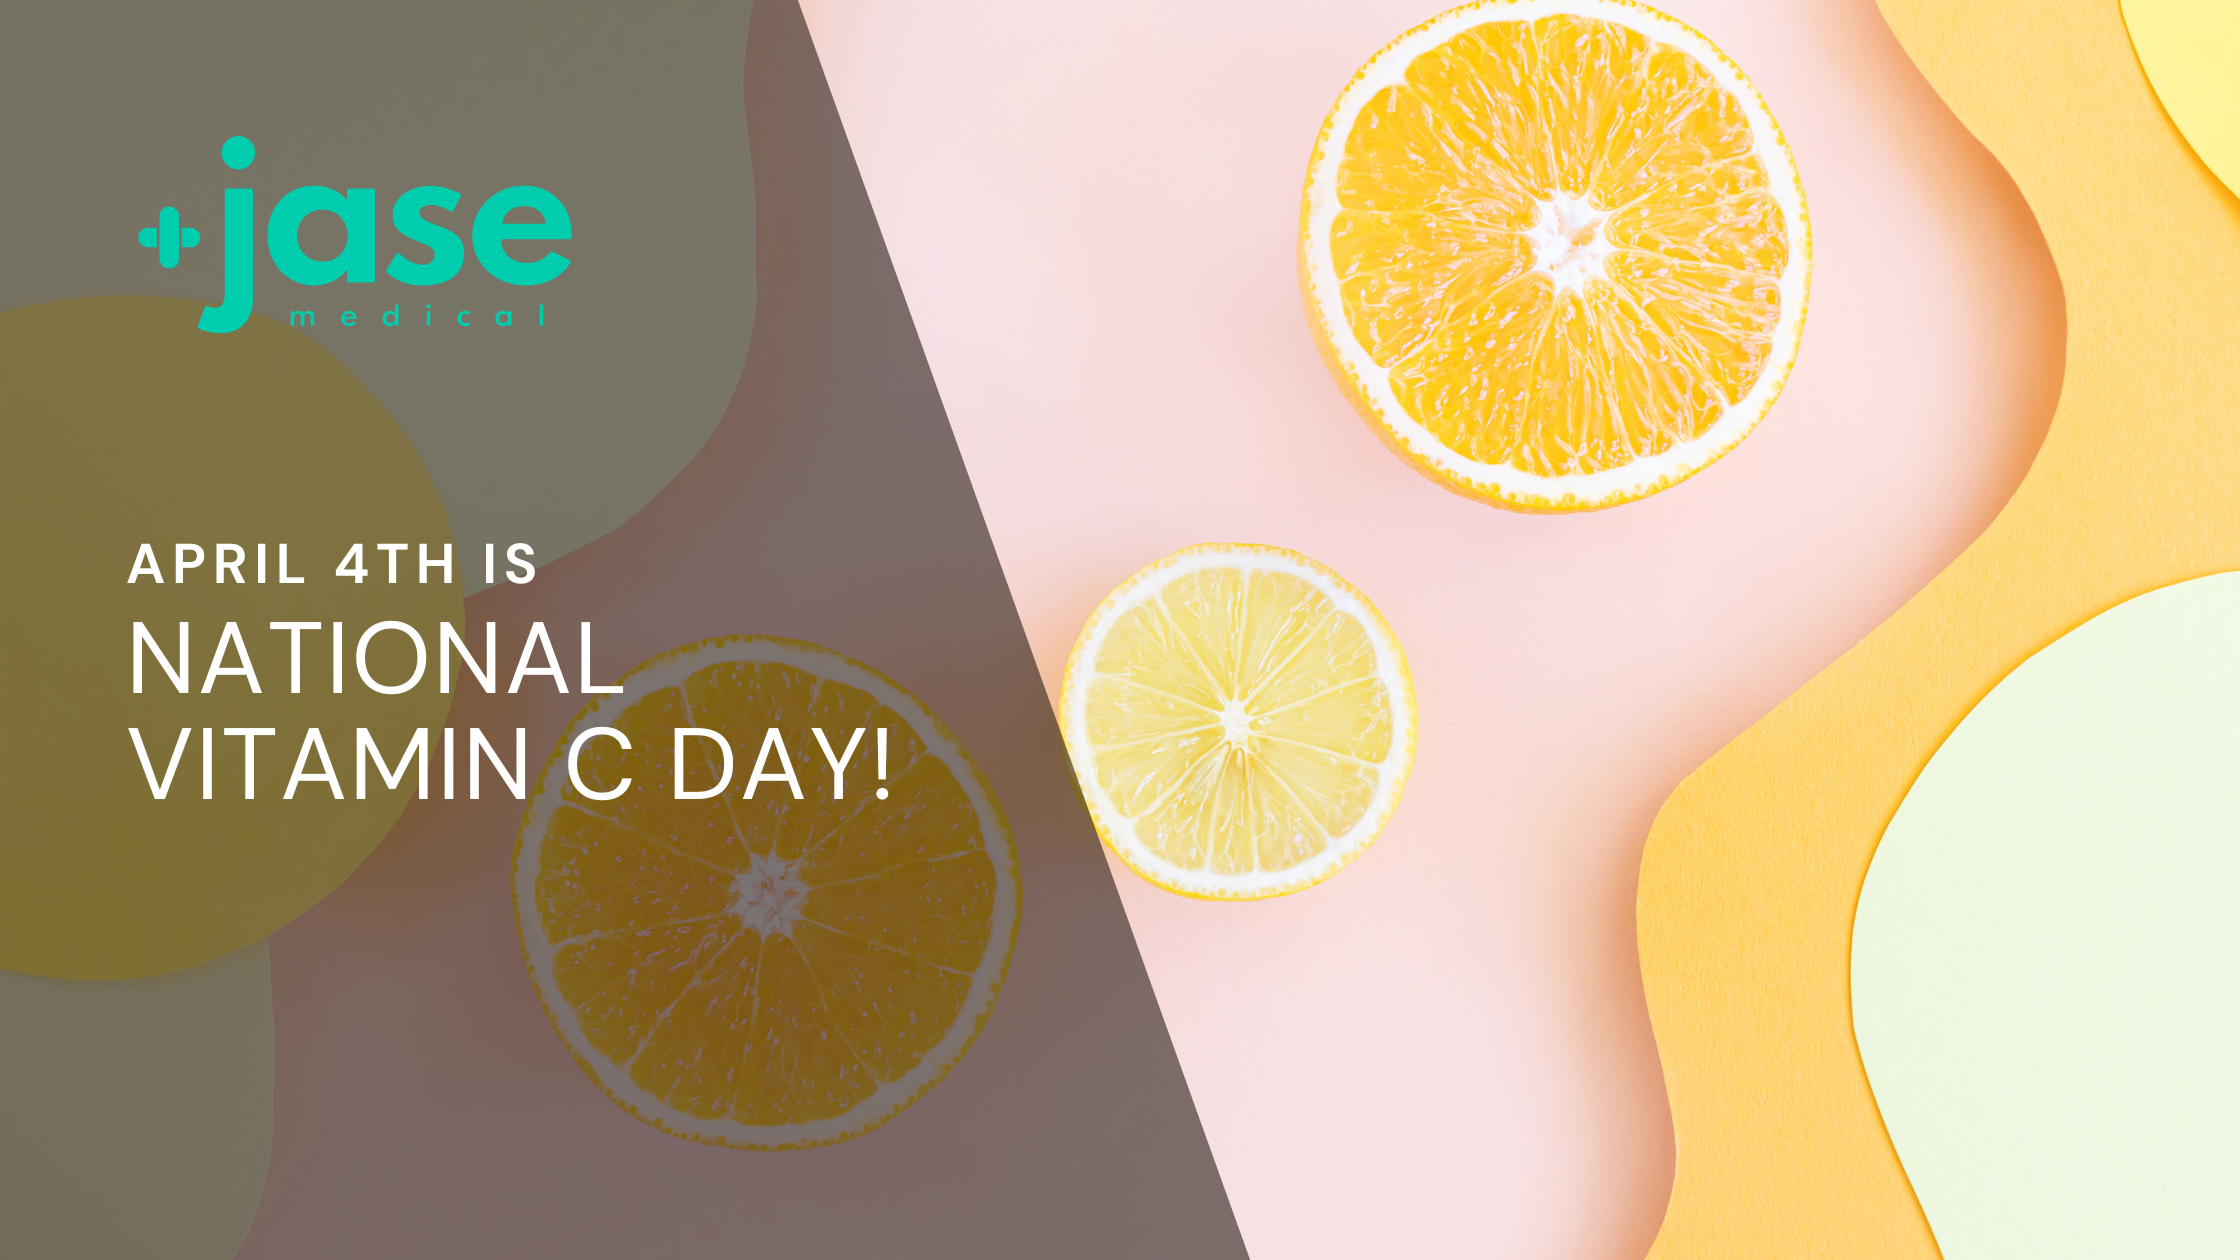 April 4th is National Vitamin C Day!